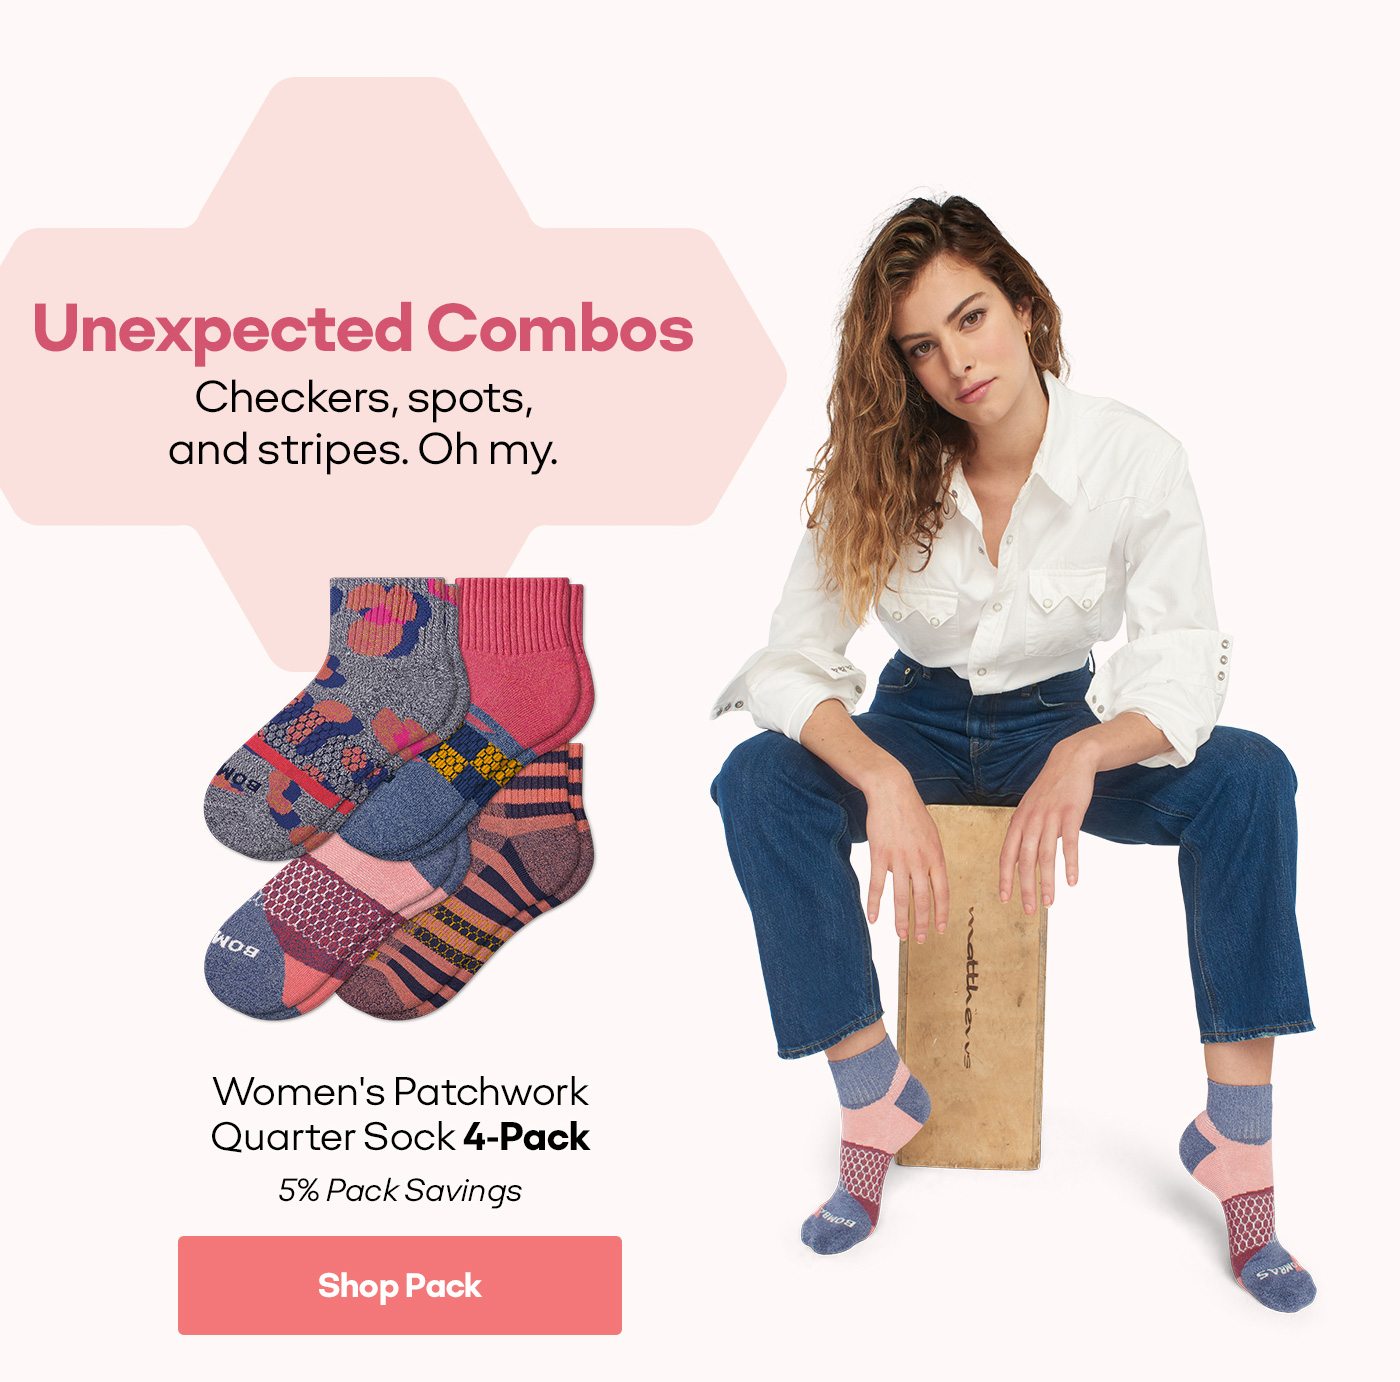 Unexpected Combos: Checkers, spots, and stripes. Oh my. | Women's Patchwork Quarter Sock 4-Pack | 5% Pack Savings [Shop Pack]